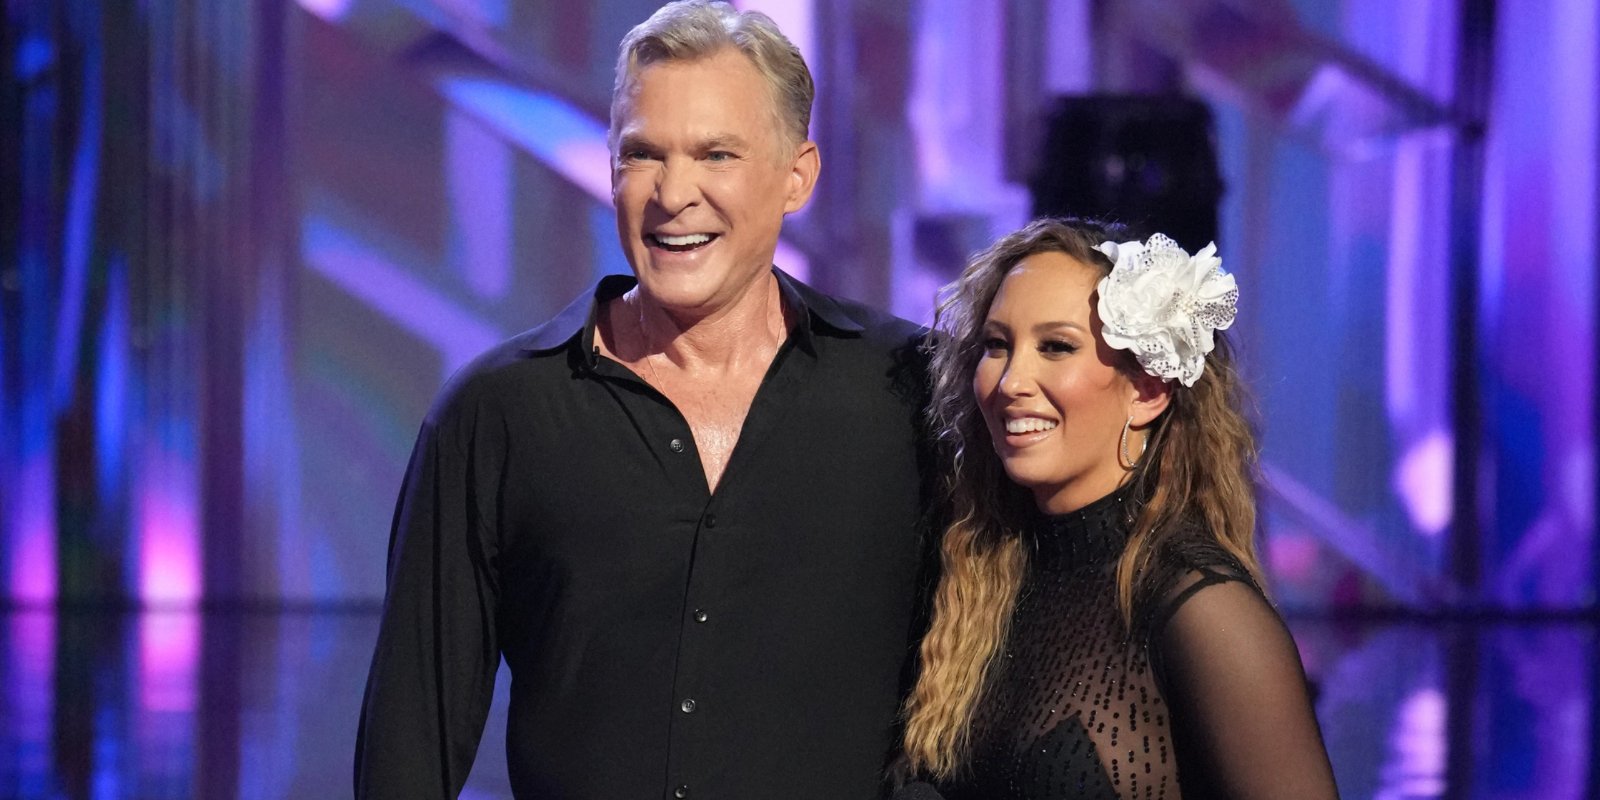 Sam Champion and Cheryl Burke during season 31 of 'Dancing with the Stars.'